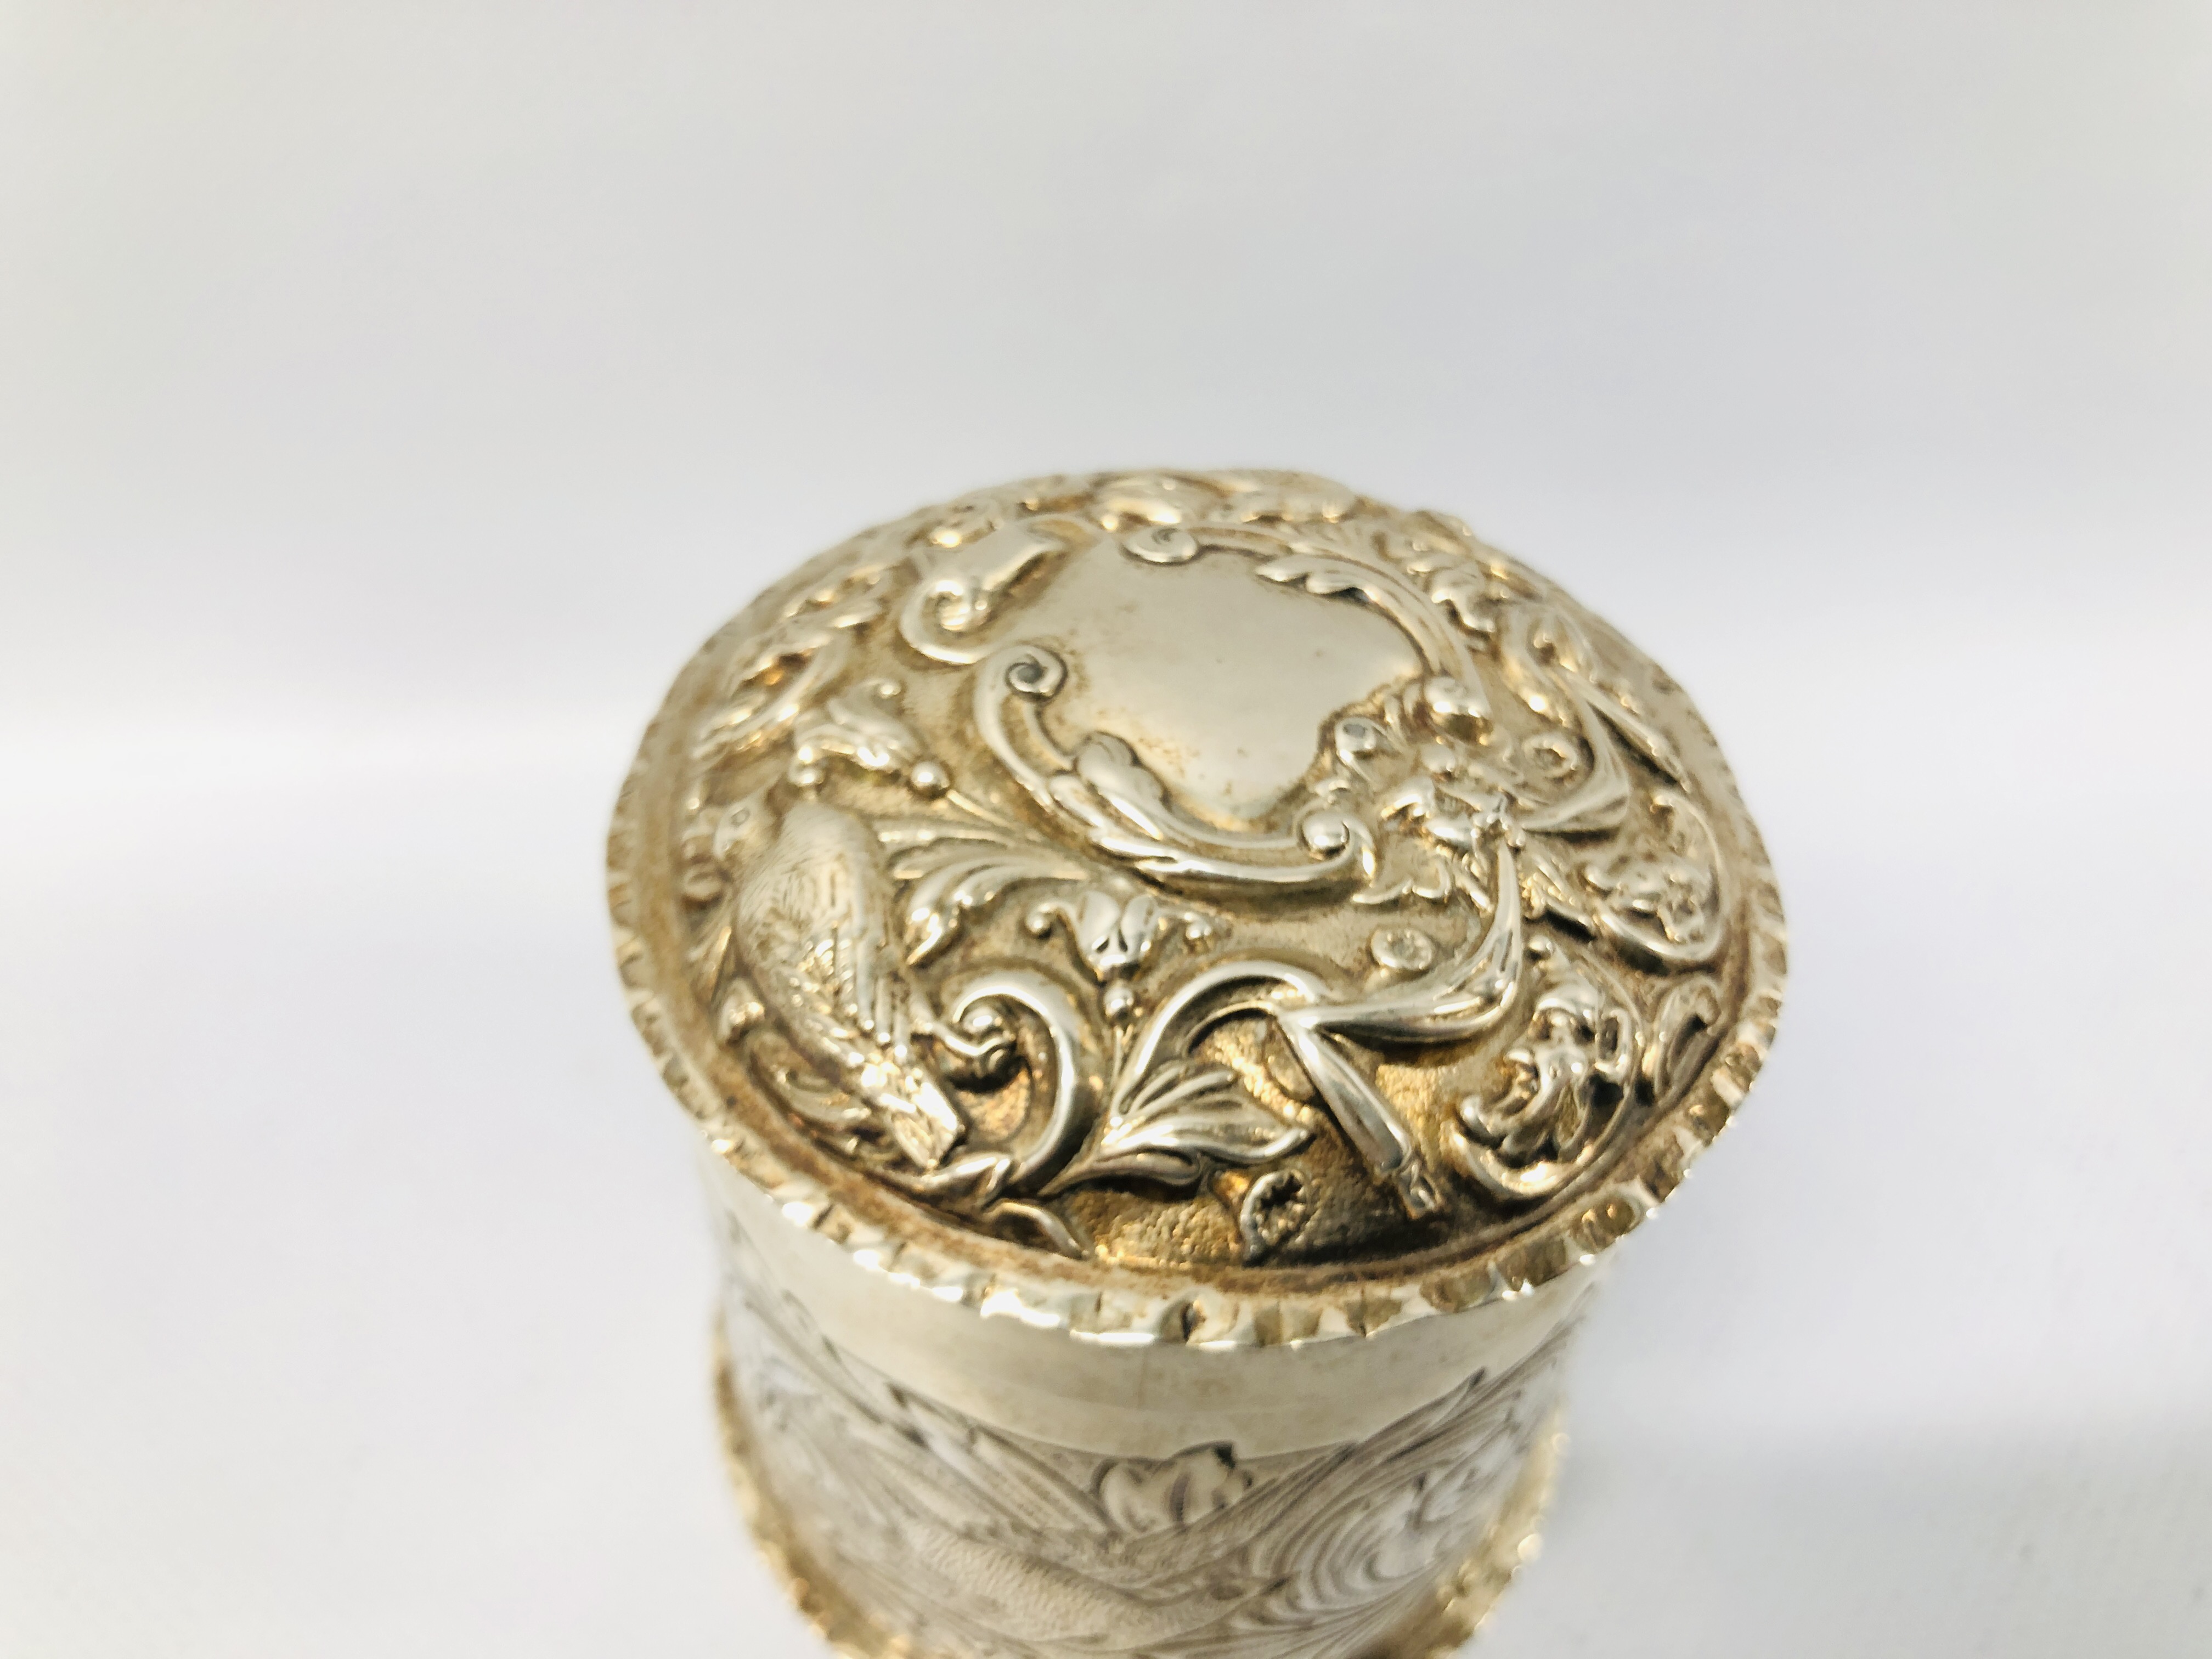 A VICTORIAN SILVER CYLINDRICAL BOX AND COVER DECORATED WITH BIRD LONDON 1888, WILLIAM COMINS - H 8. - Image 5 of 21